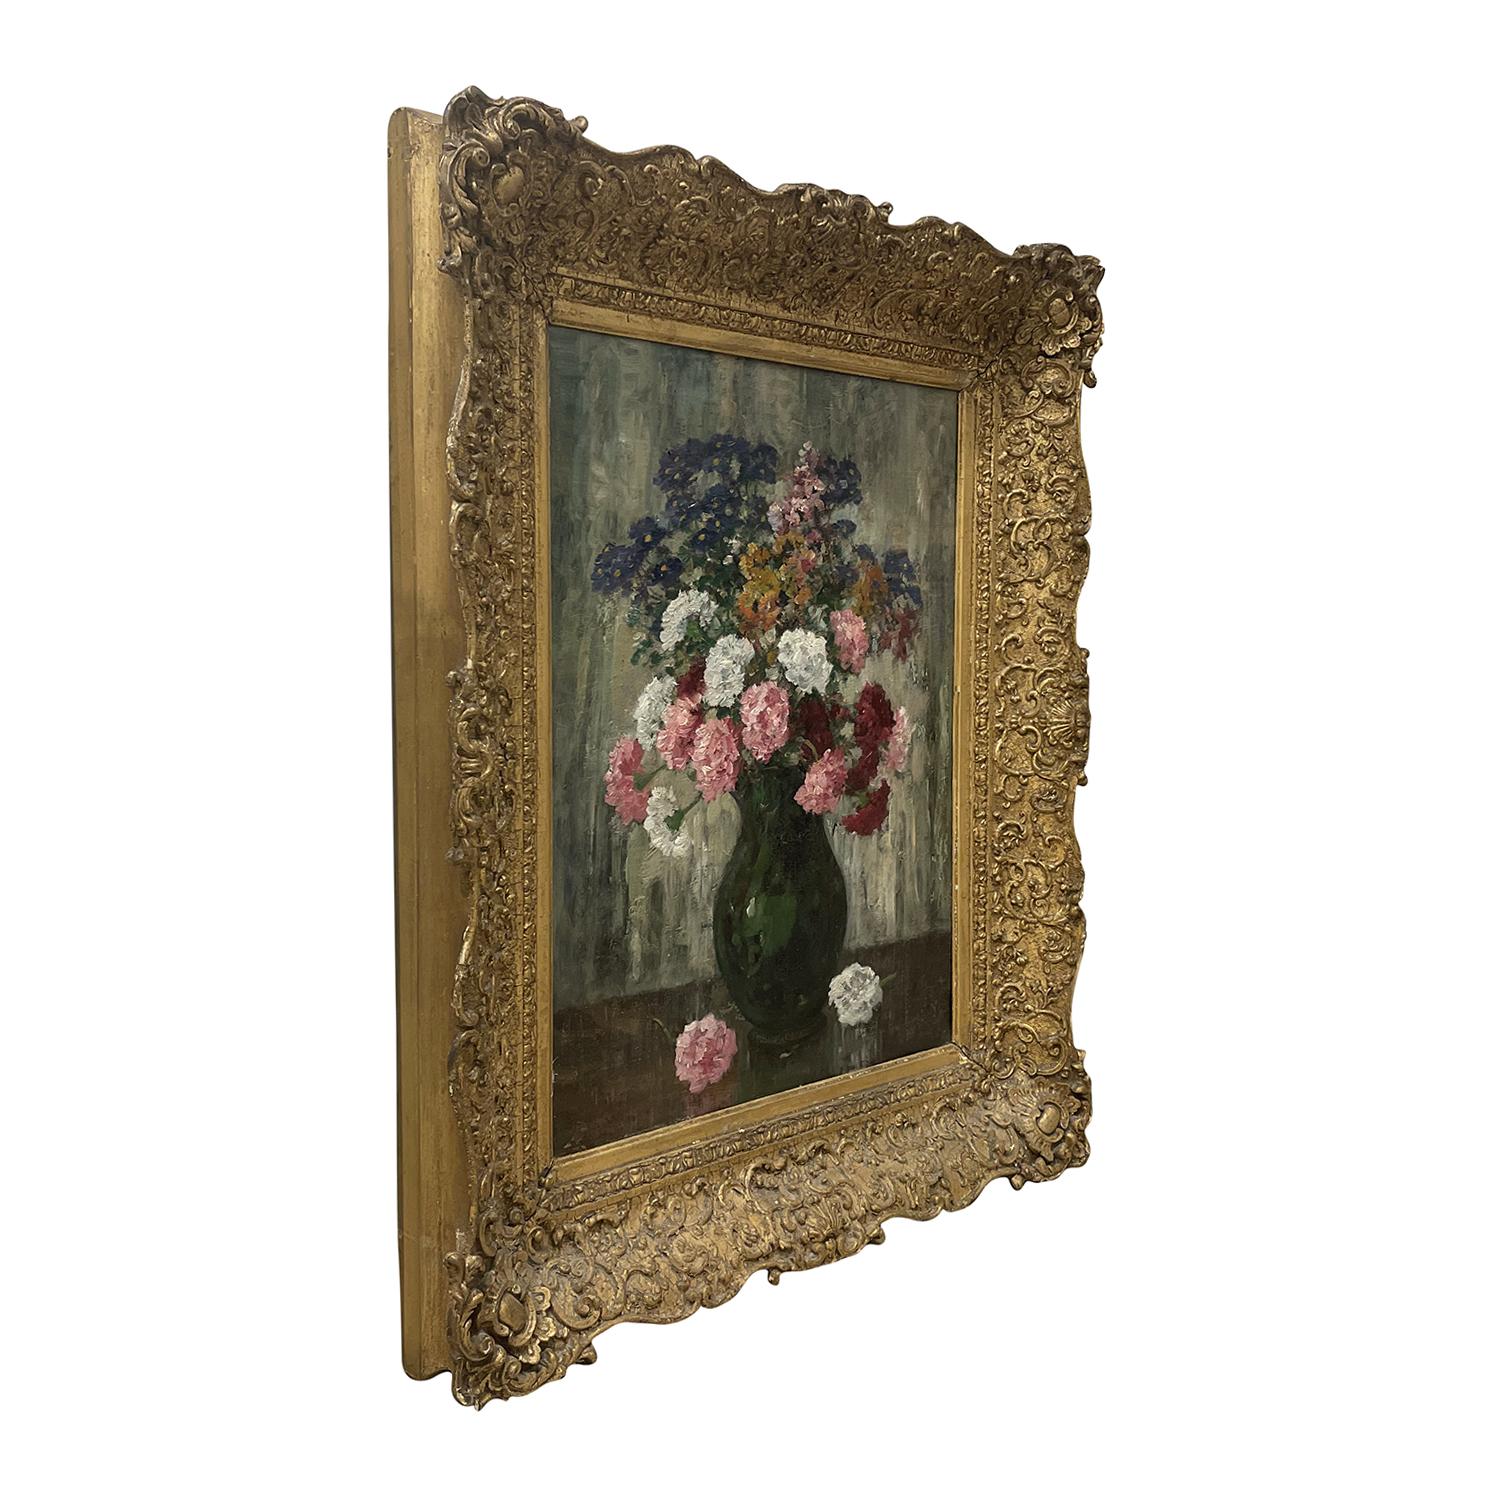 A light-green, grey vintage Art Deco French still life oil on cardboard painting depicting a working table with a green vase with flowers, painted by Camille Matisse in a hand crafted, original gilded Pinewood frame, in good condition. The colorful